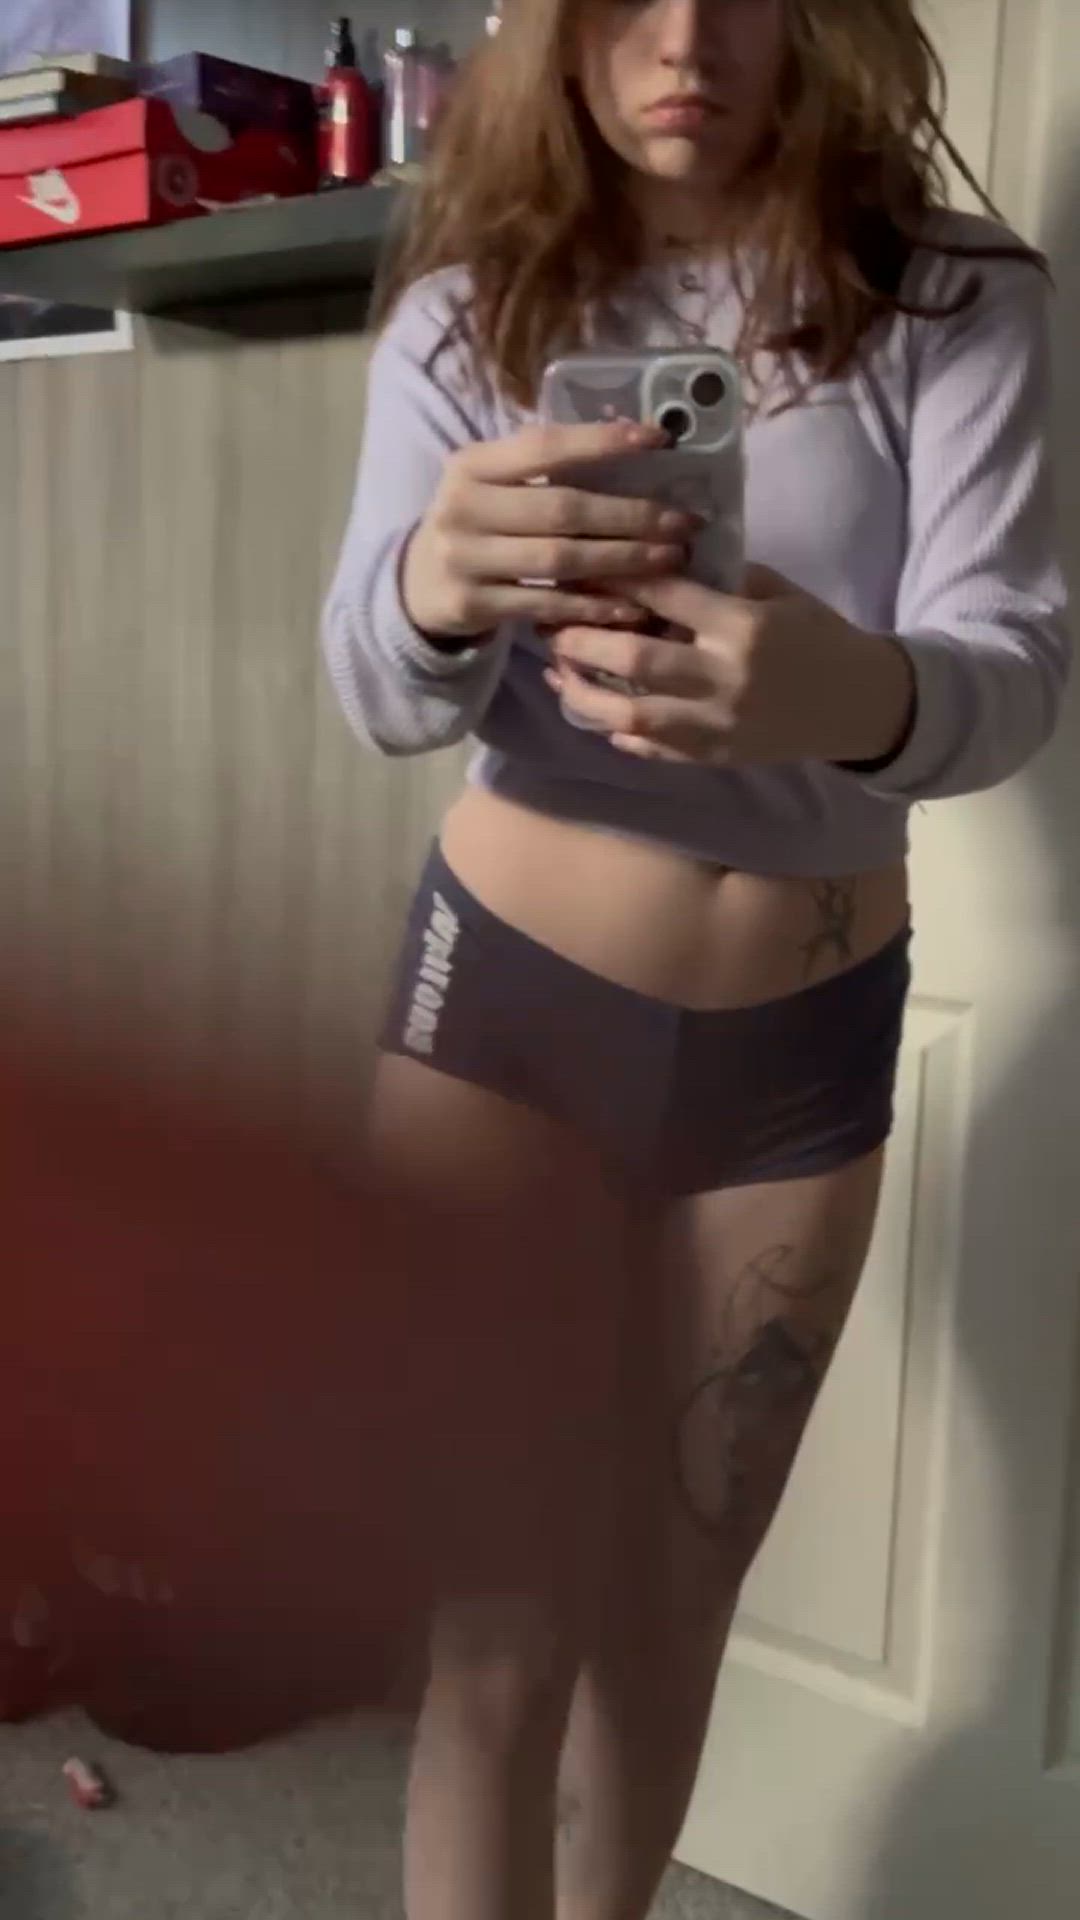 Teen porn video with onlyfans model aylaxcollins <strong>@aylaxcollins</strong>